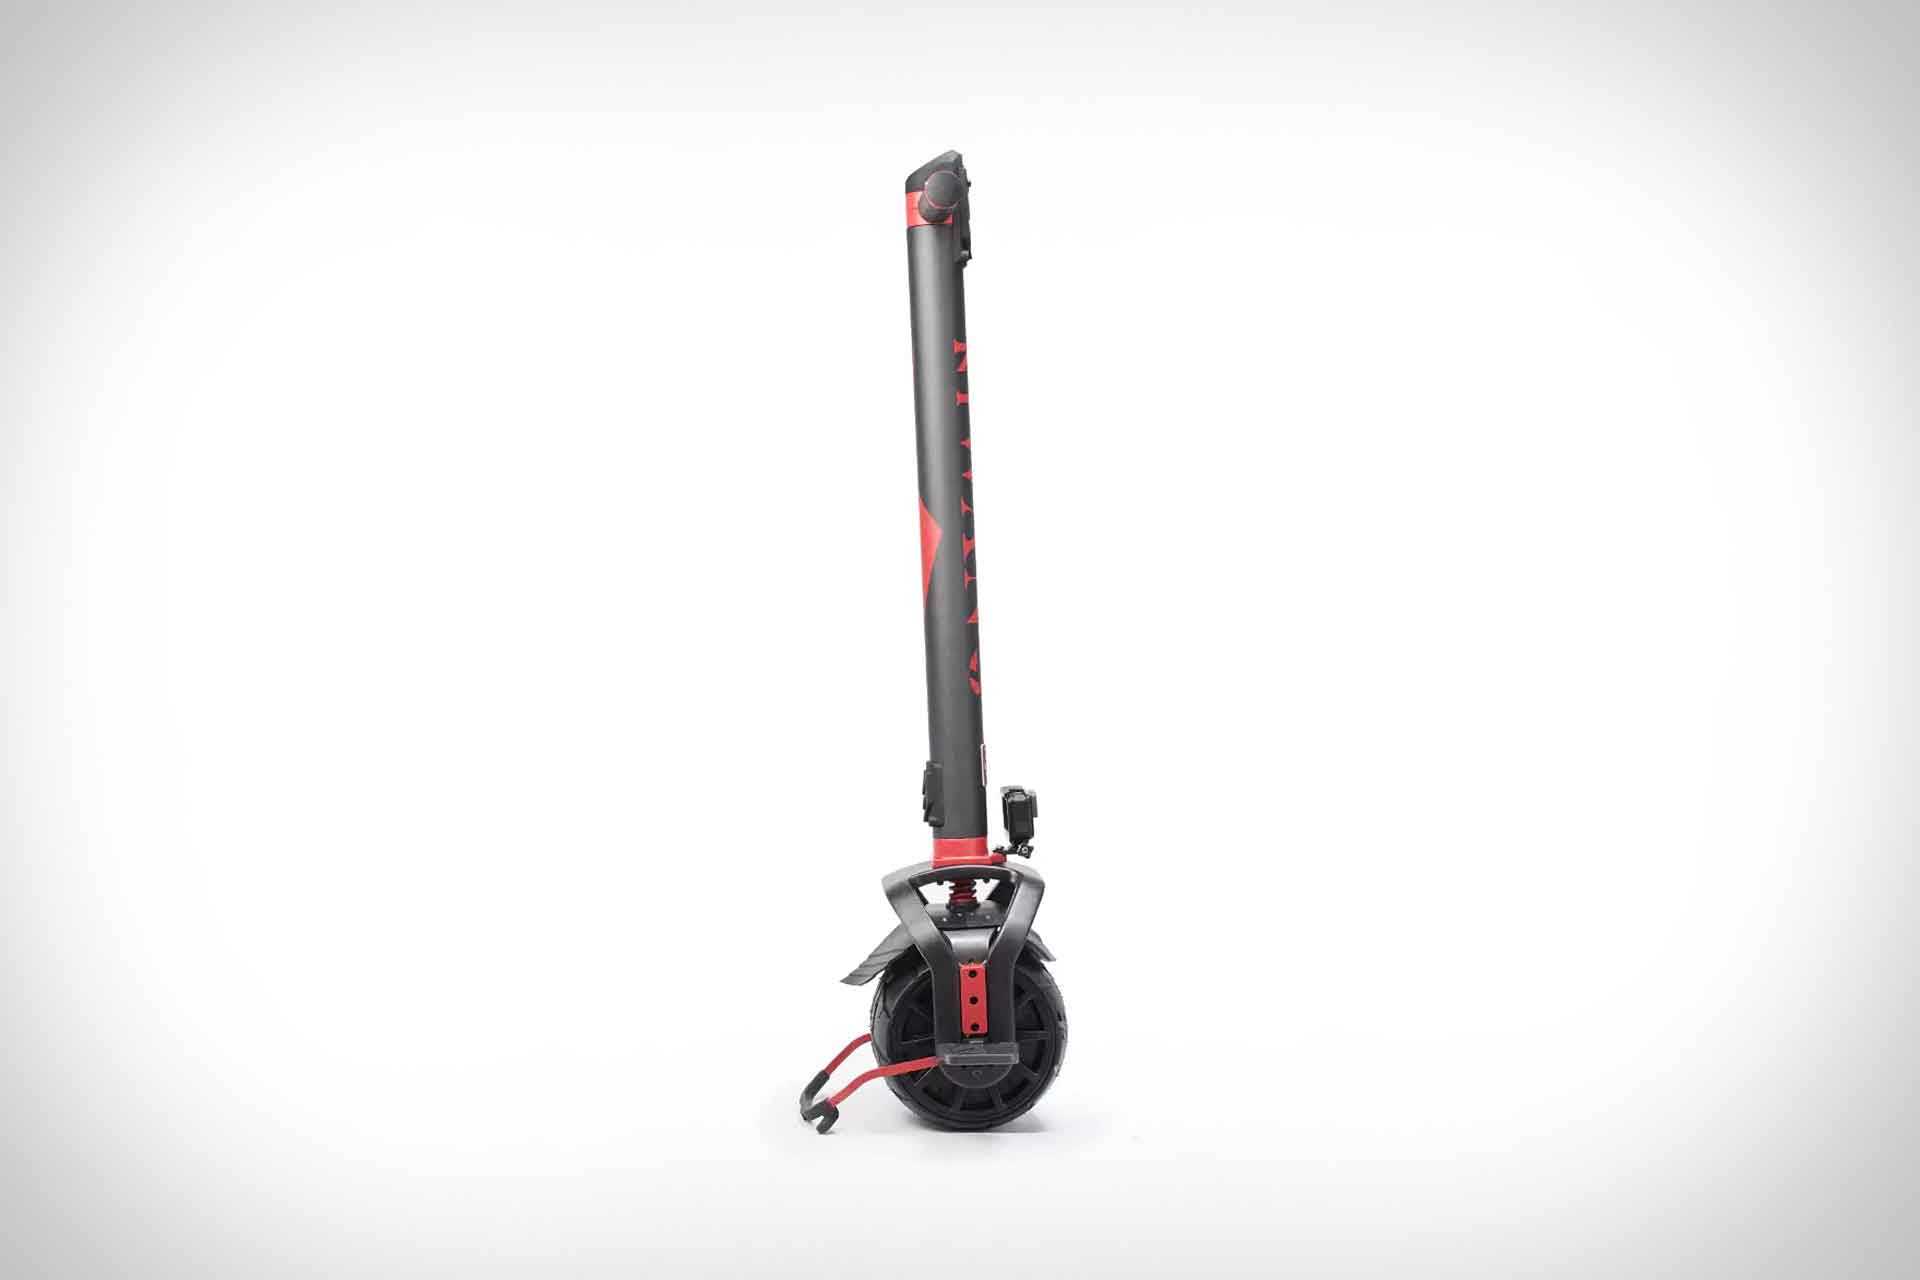 Kiwano KO1+ Electric Scooter Uncrate